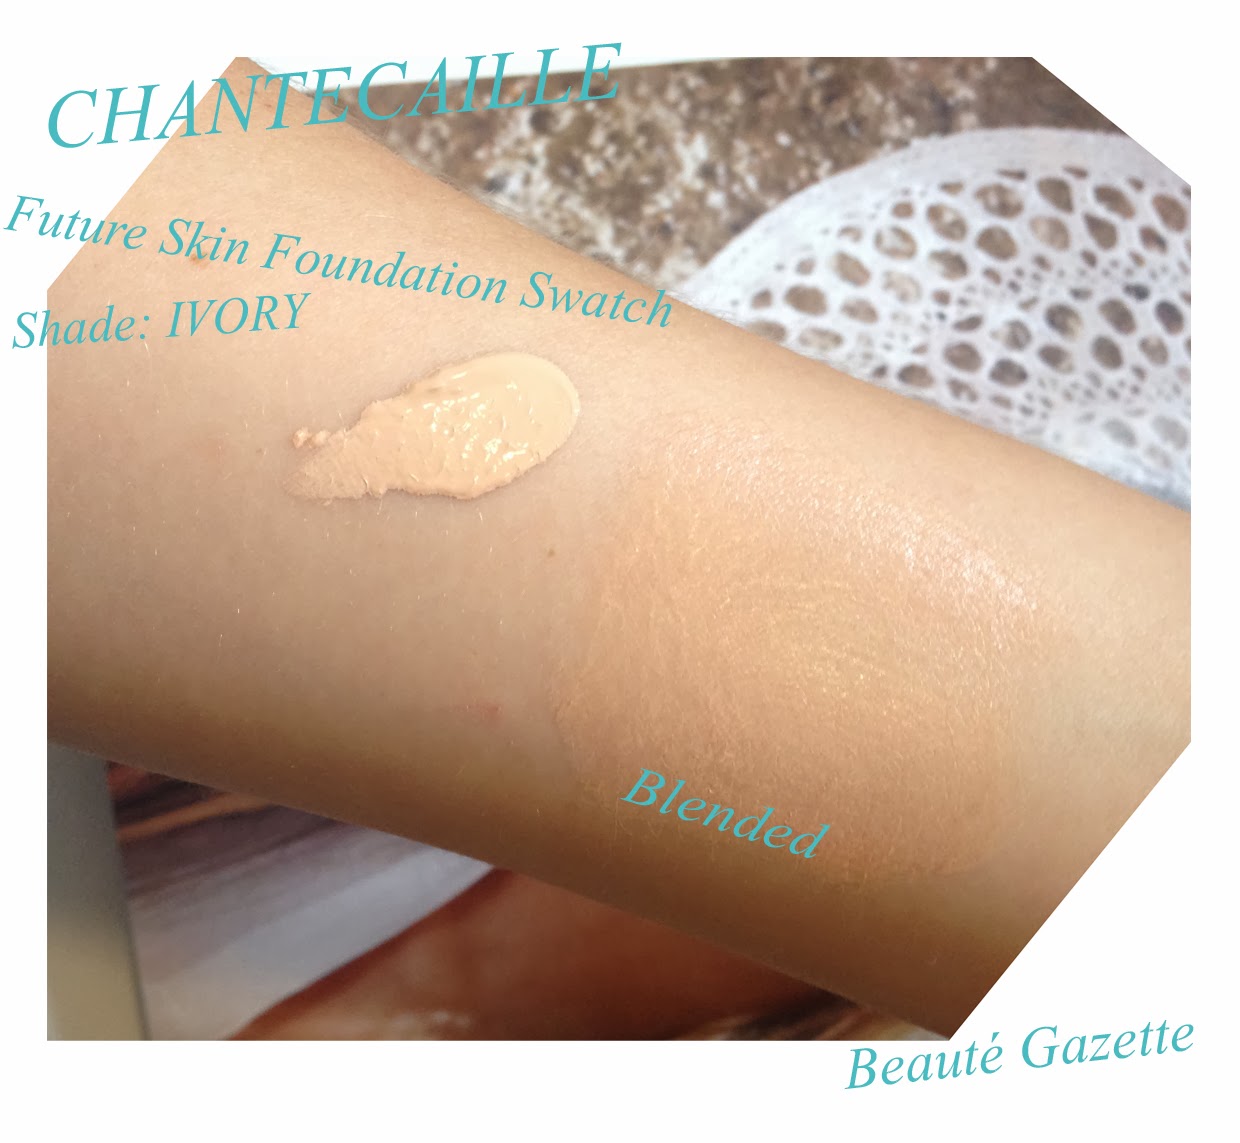 CHANTECAILLE Future Skin Foundation in Ivory - Review and Swatches.